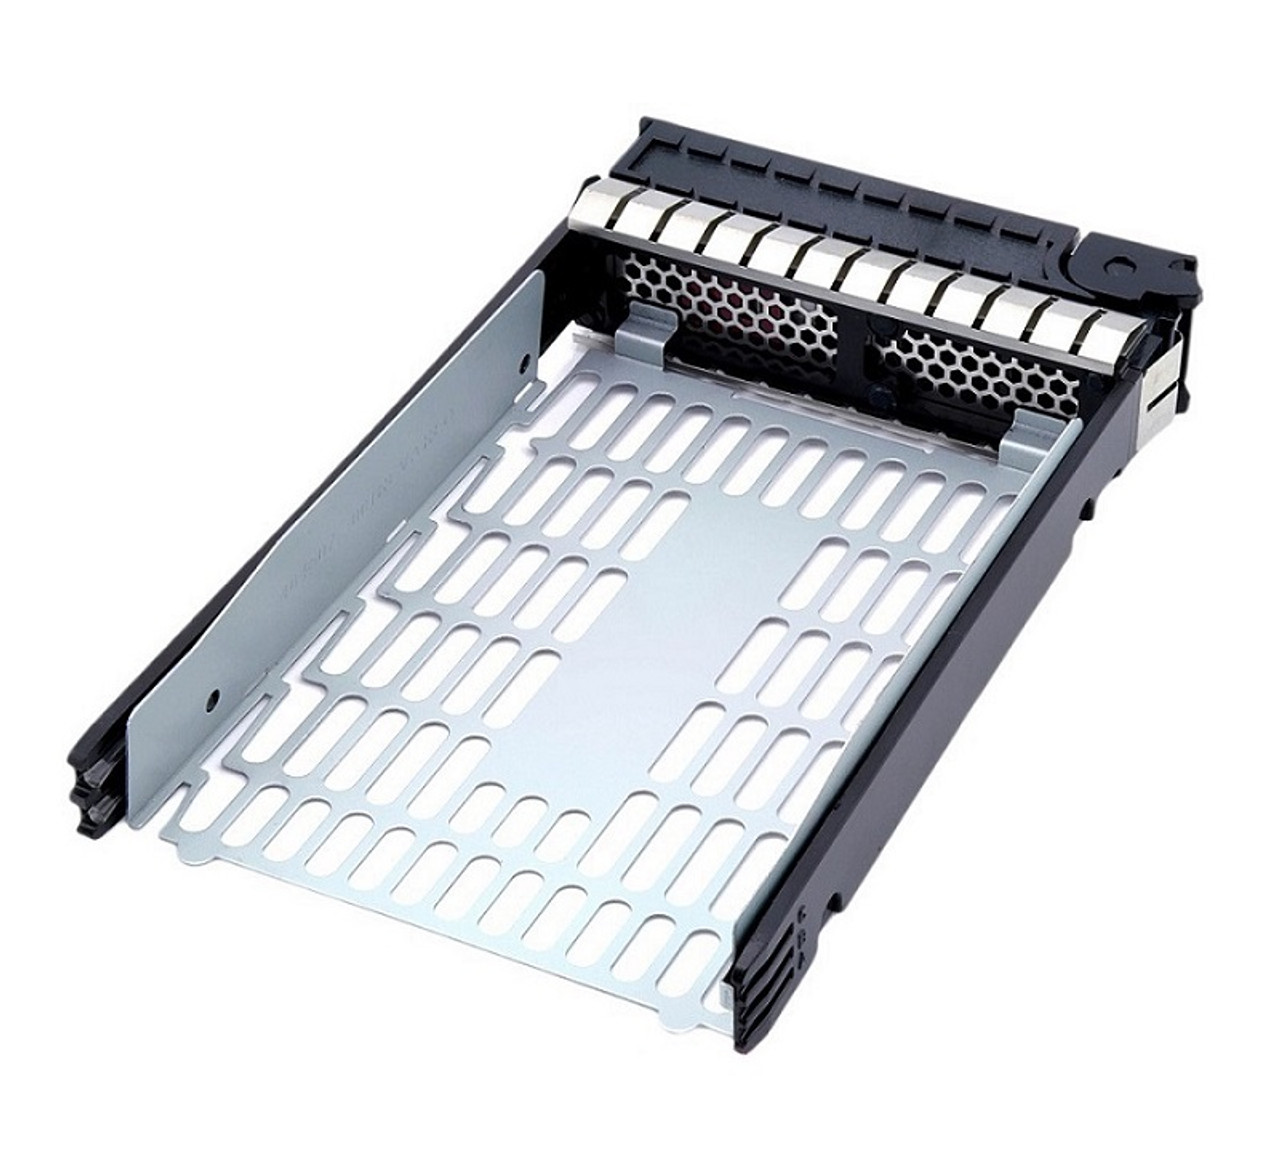 55KUU - Dell Hot-pluggable Blank Hard Drive Carrier Tray Sled for Dell PowerEdge